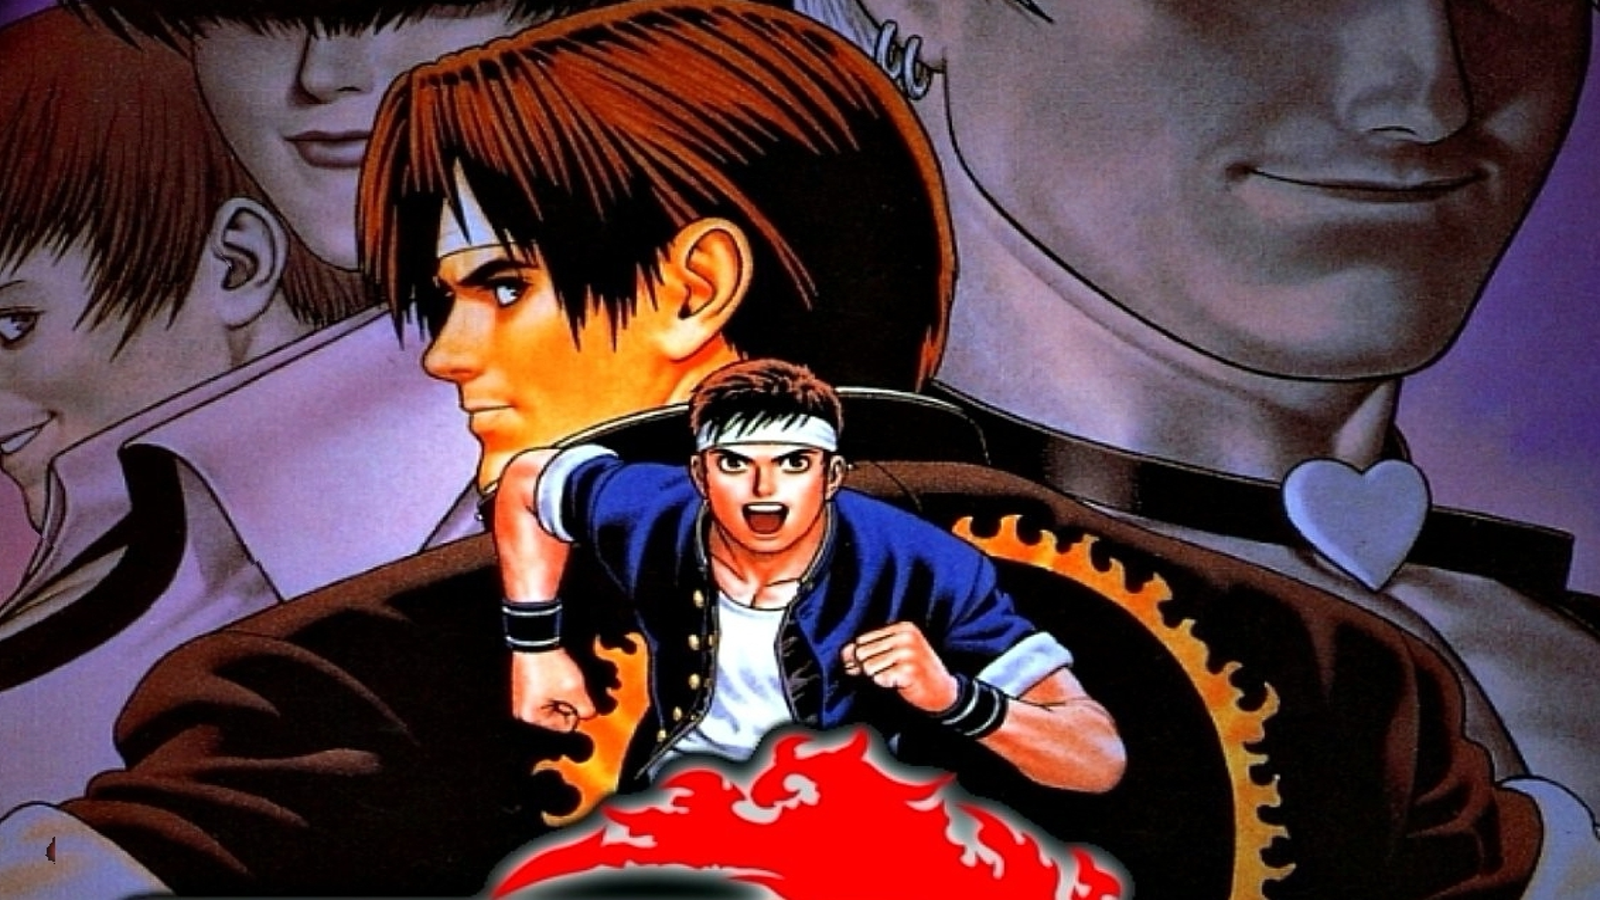 The King Of Fighters '97 Global Match